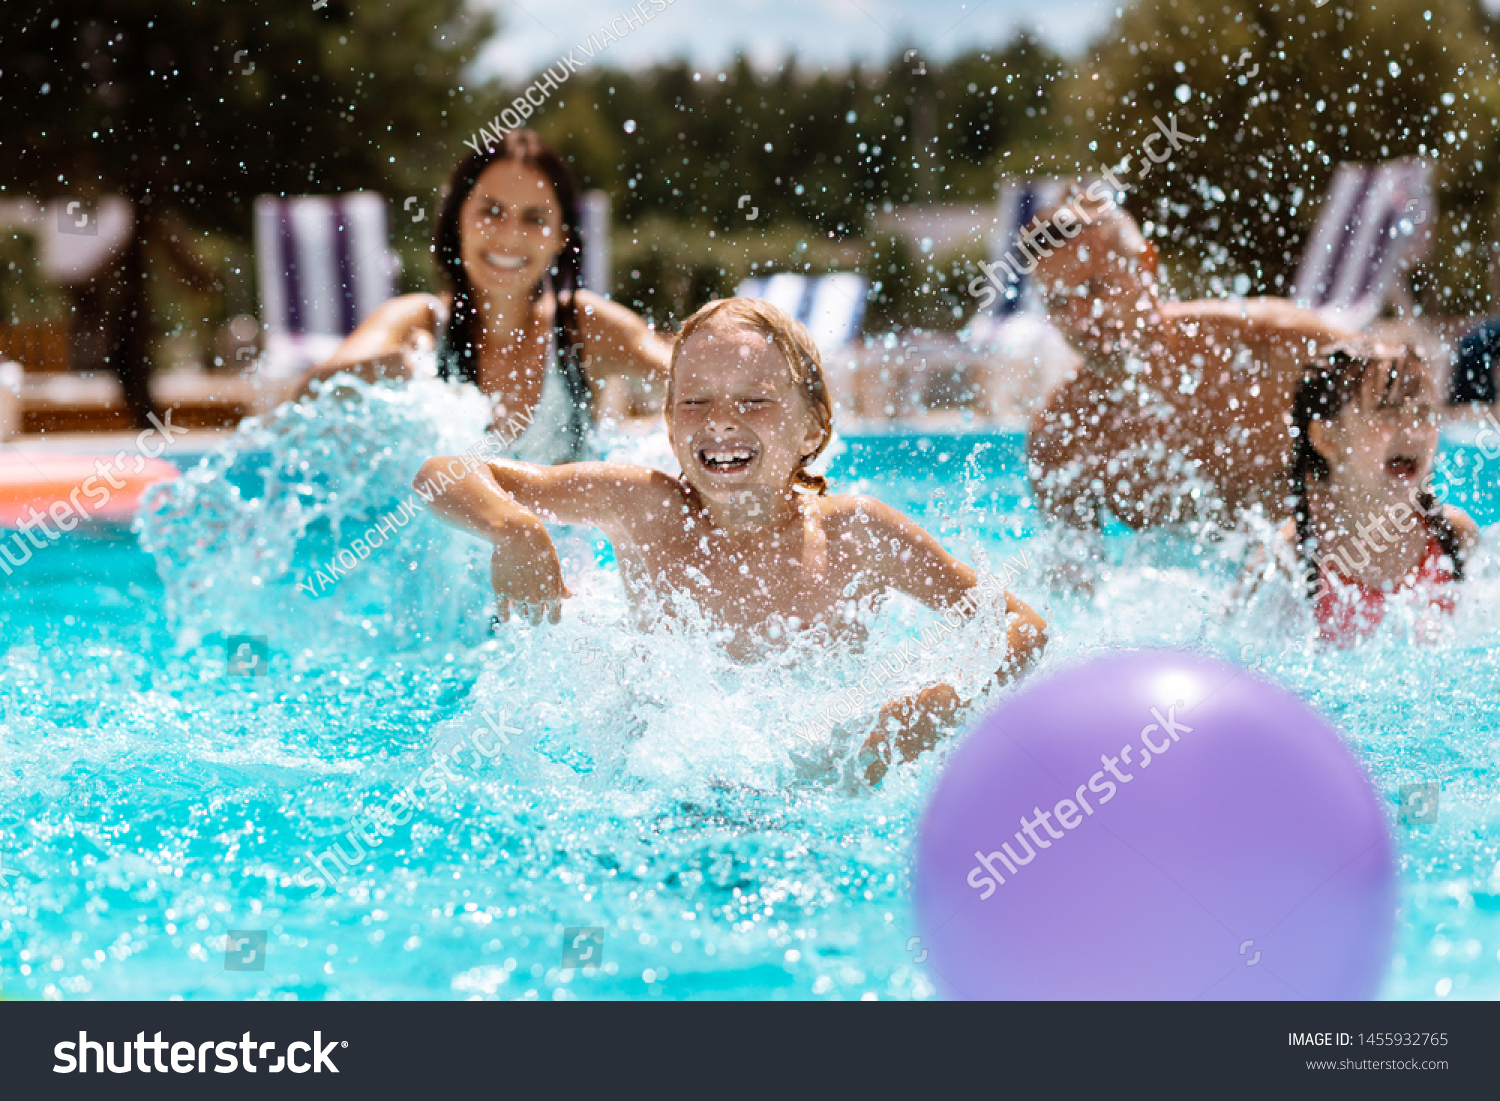 Ball in pool. Cheerful happy parents and children laughing while playing ball in swimming pool #1455932765